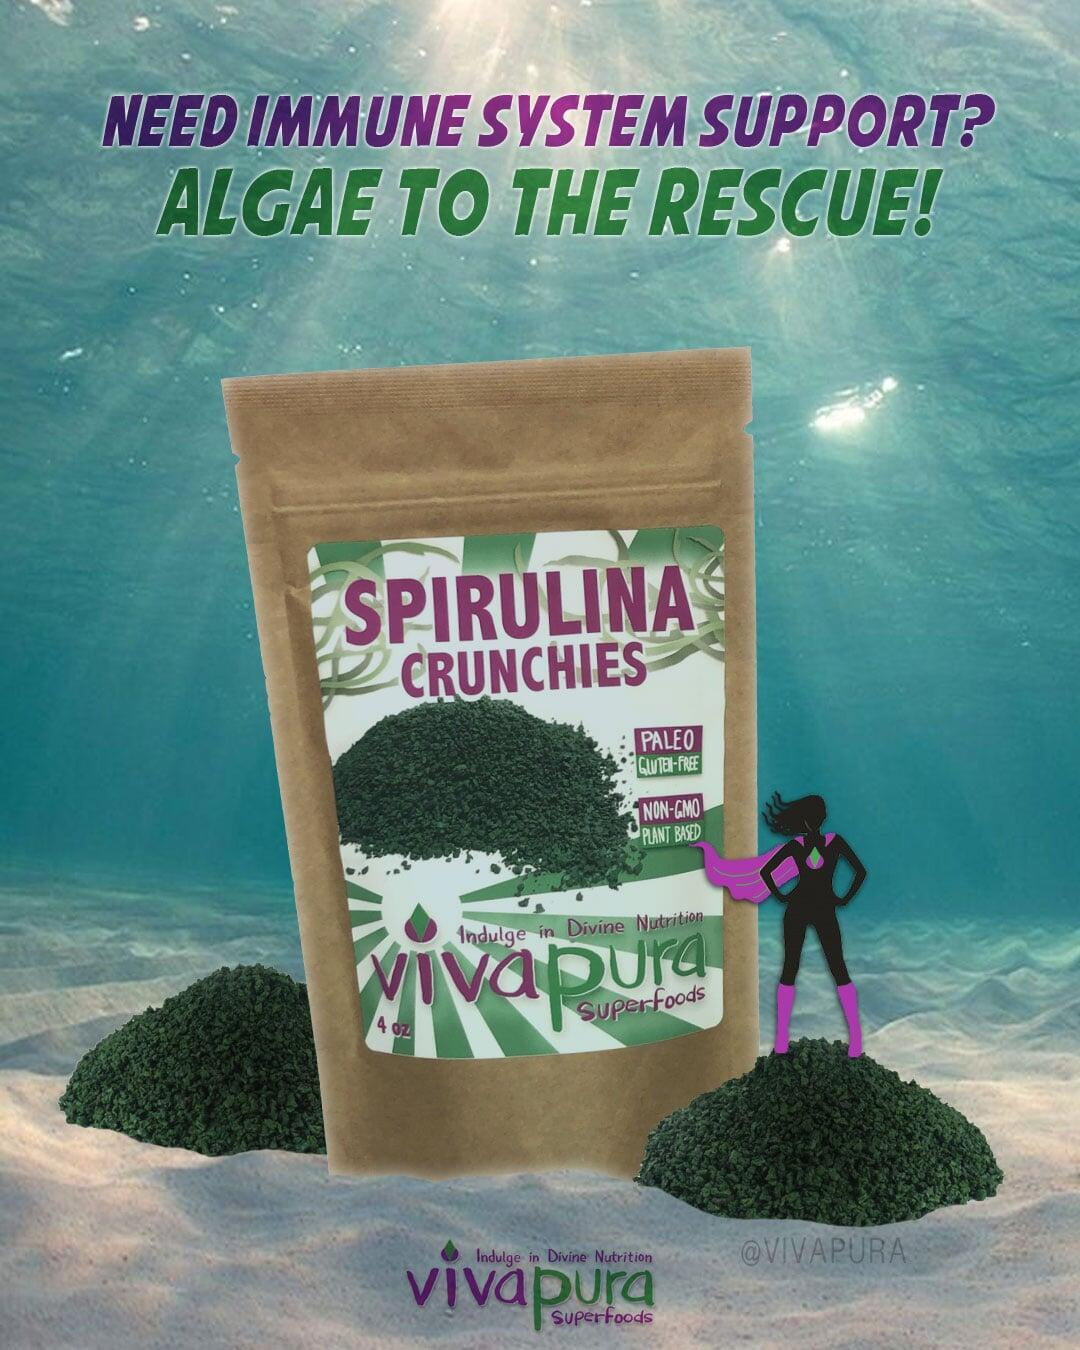 What's the best form of Spirulina? Powder or Crunchy Nibs